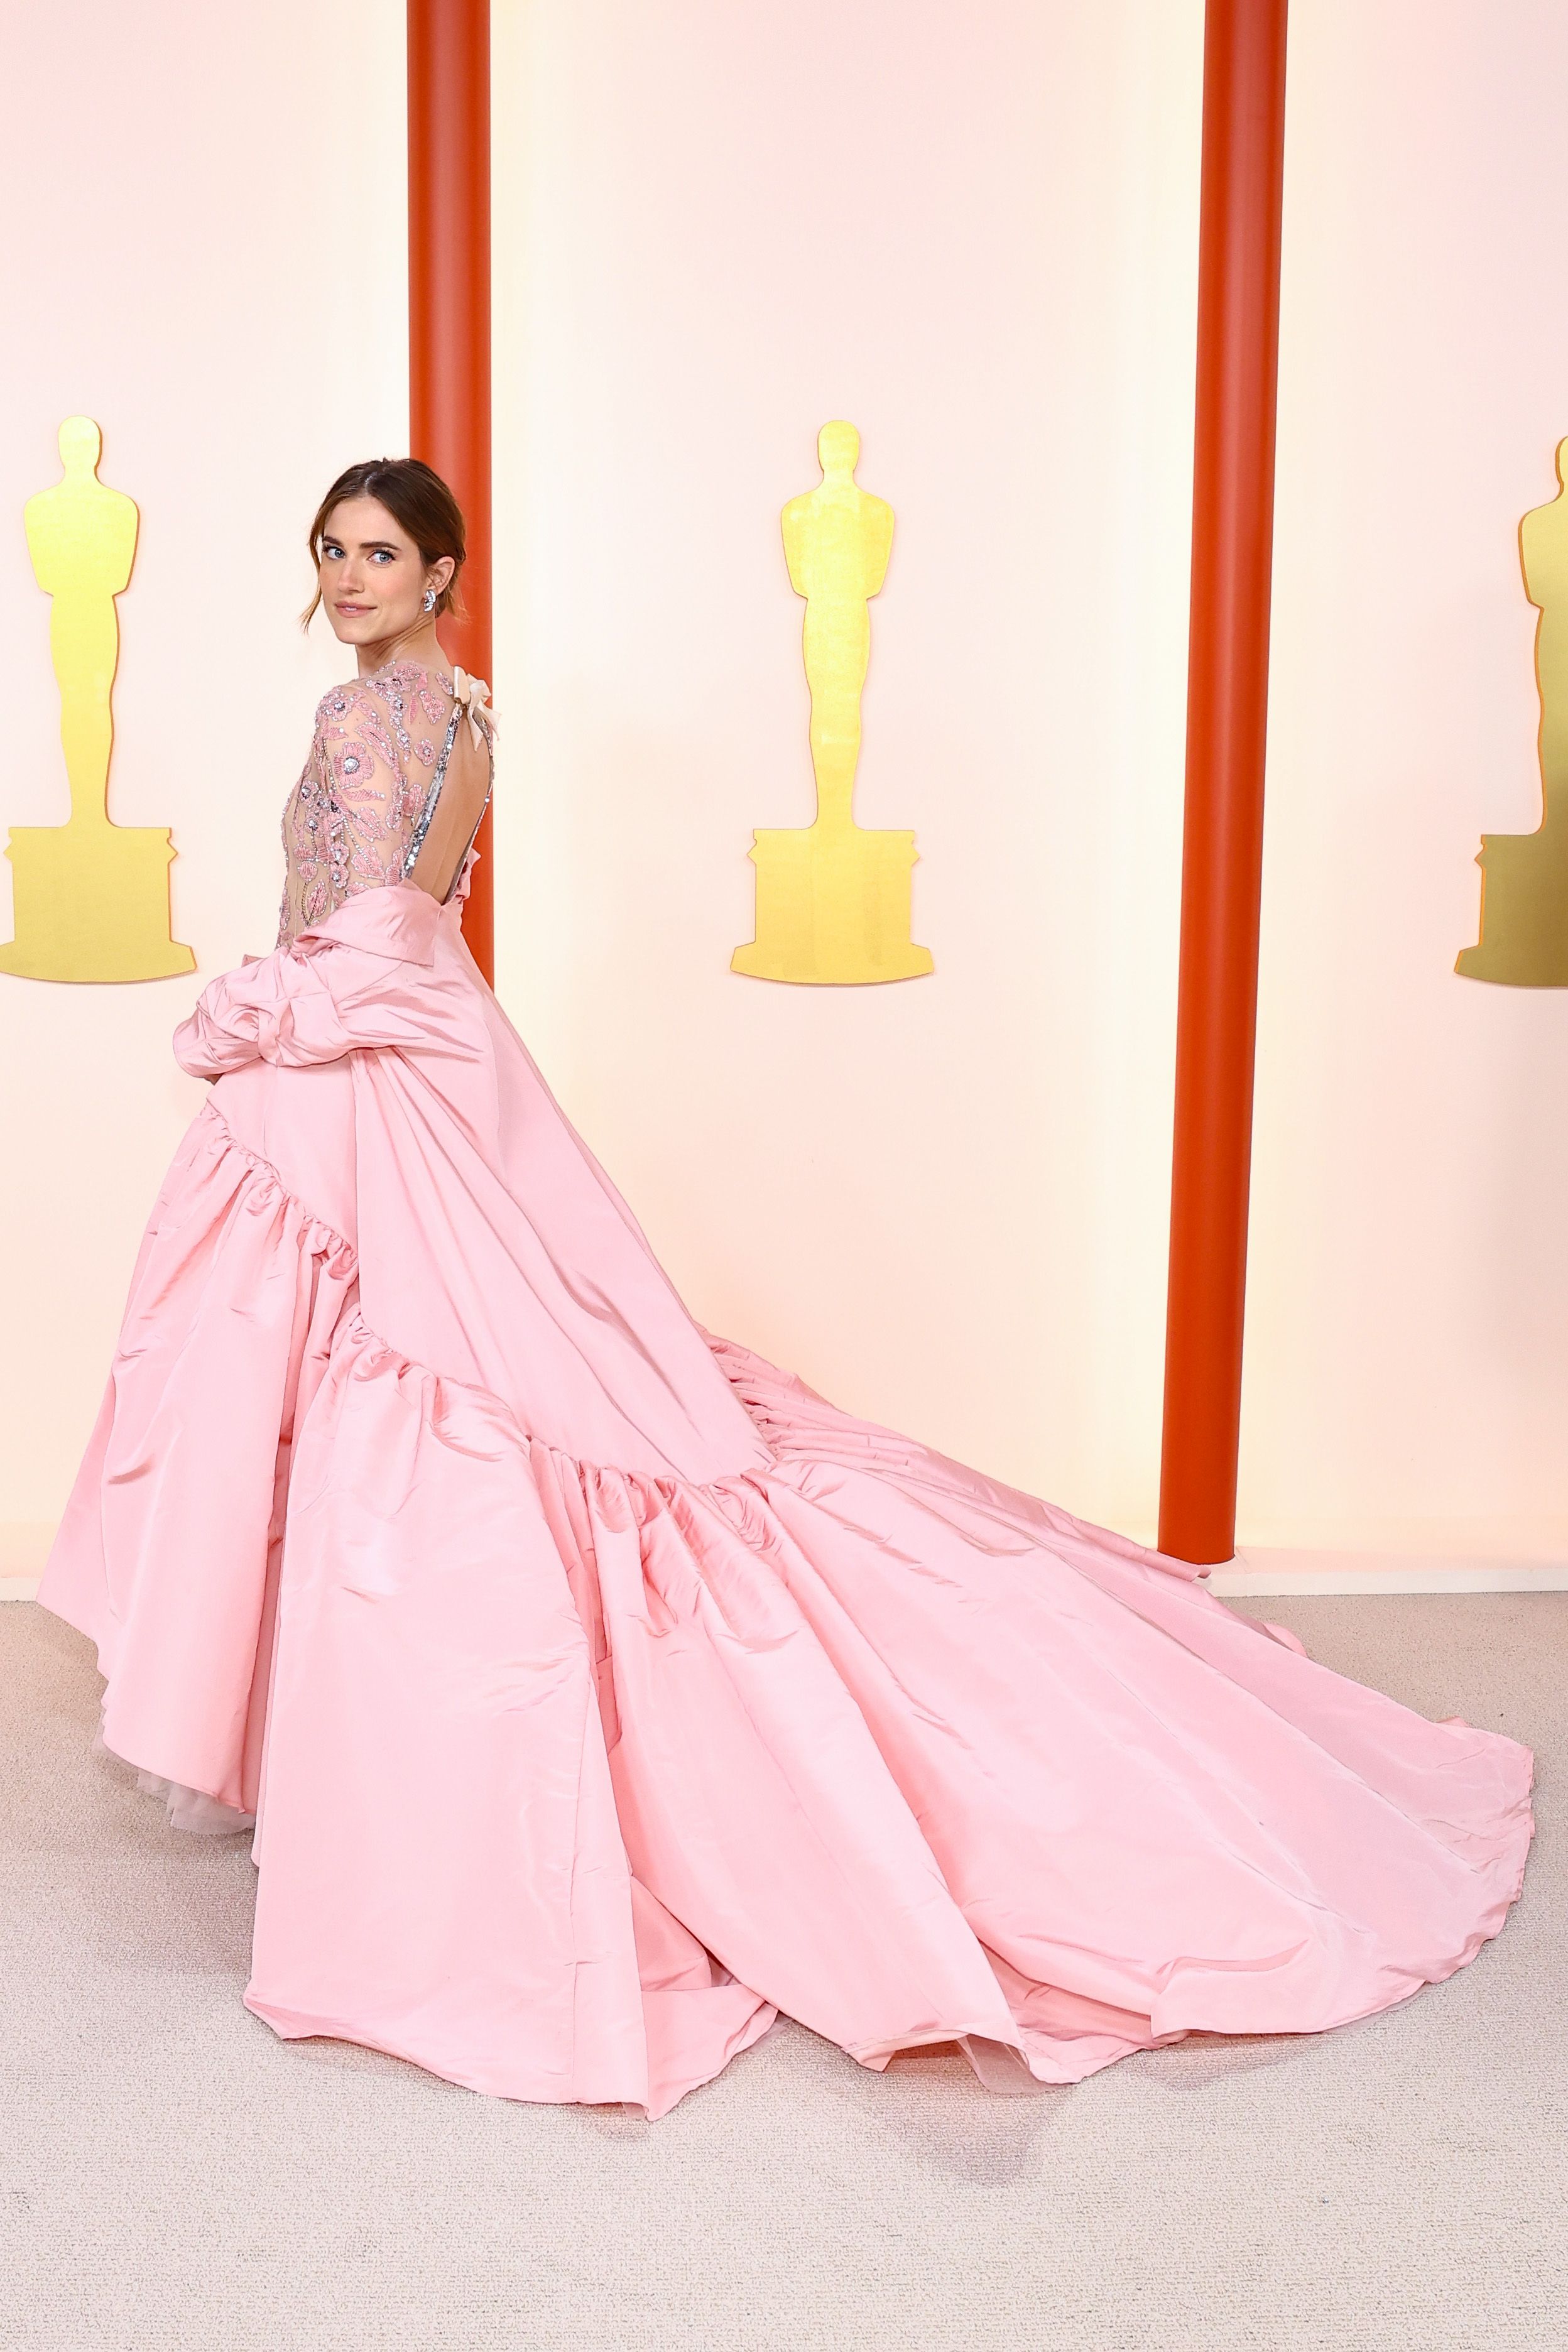 Jennifer Connelly Shines in Louis Vuitton at Oscars Red Carpet